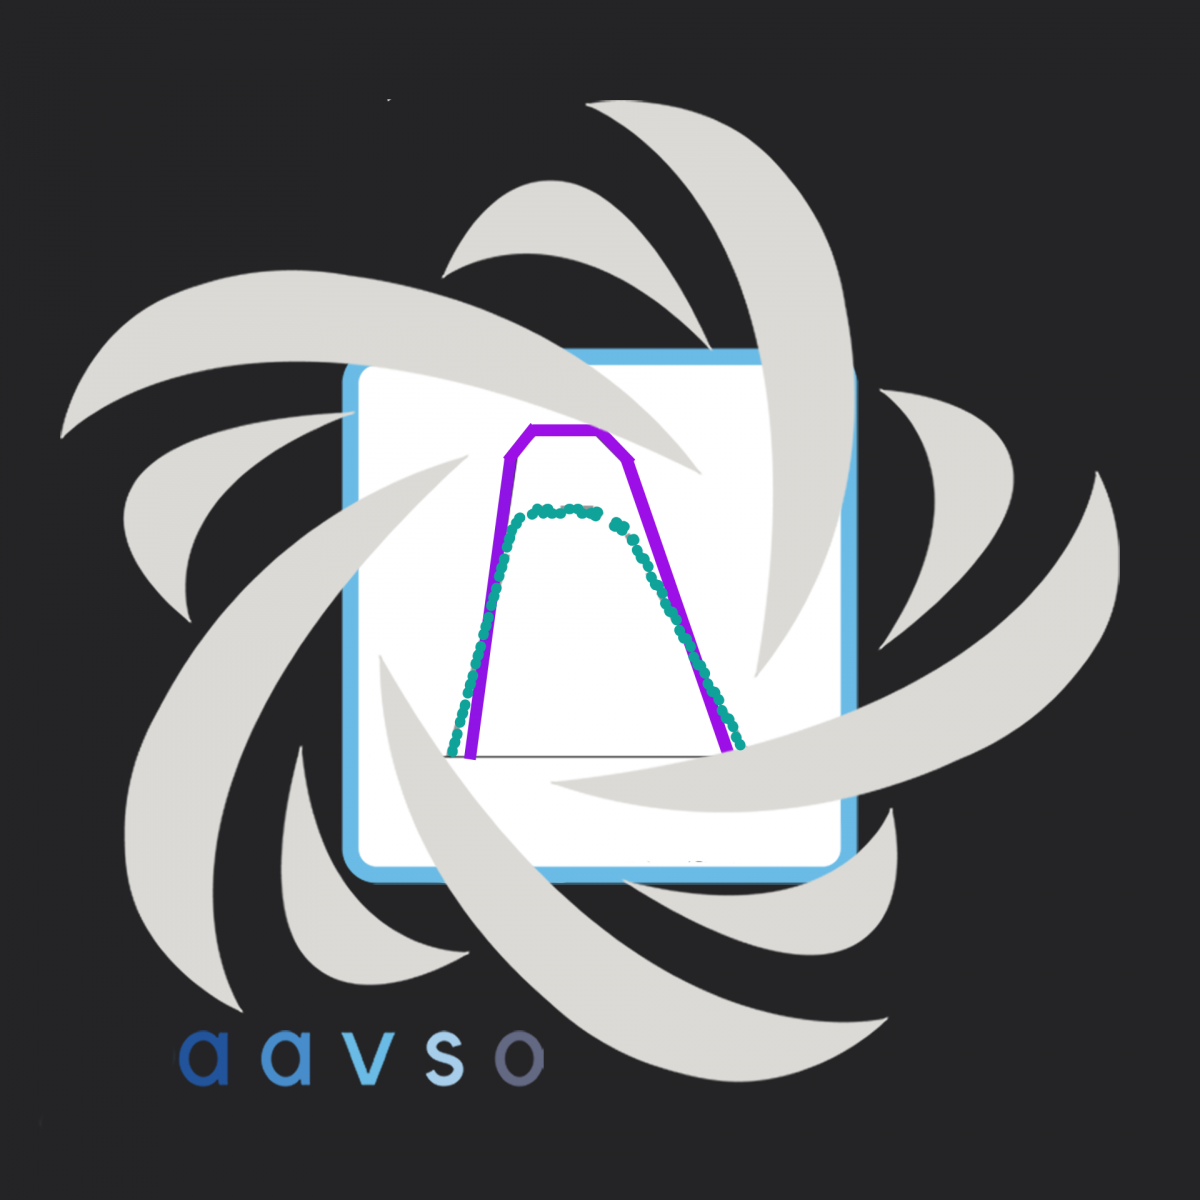 One solid line curve, with a shorter dotted curve underneath it at center of AAVSSO swirly star logo.